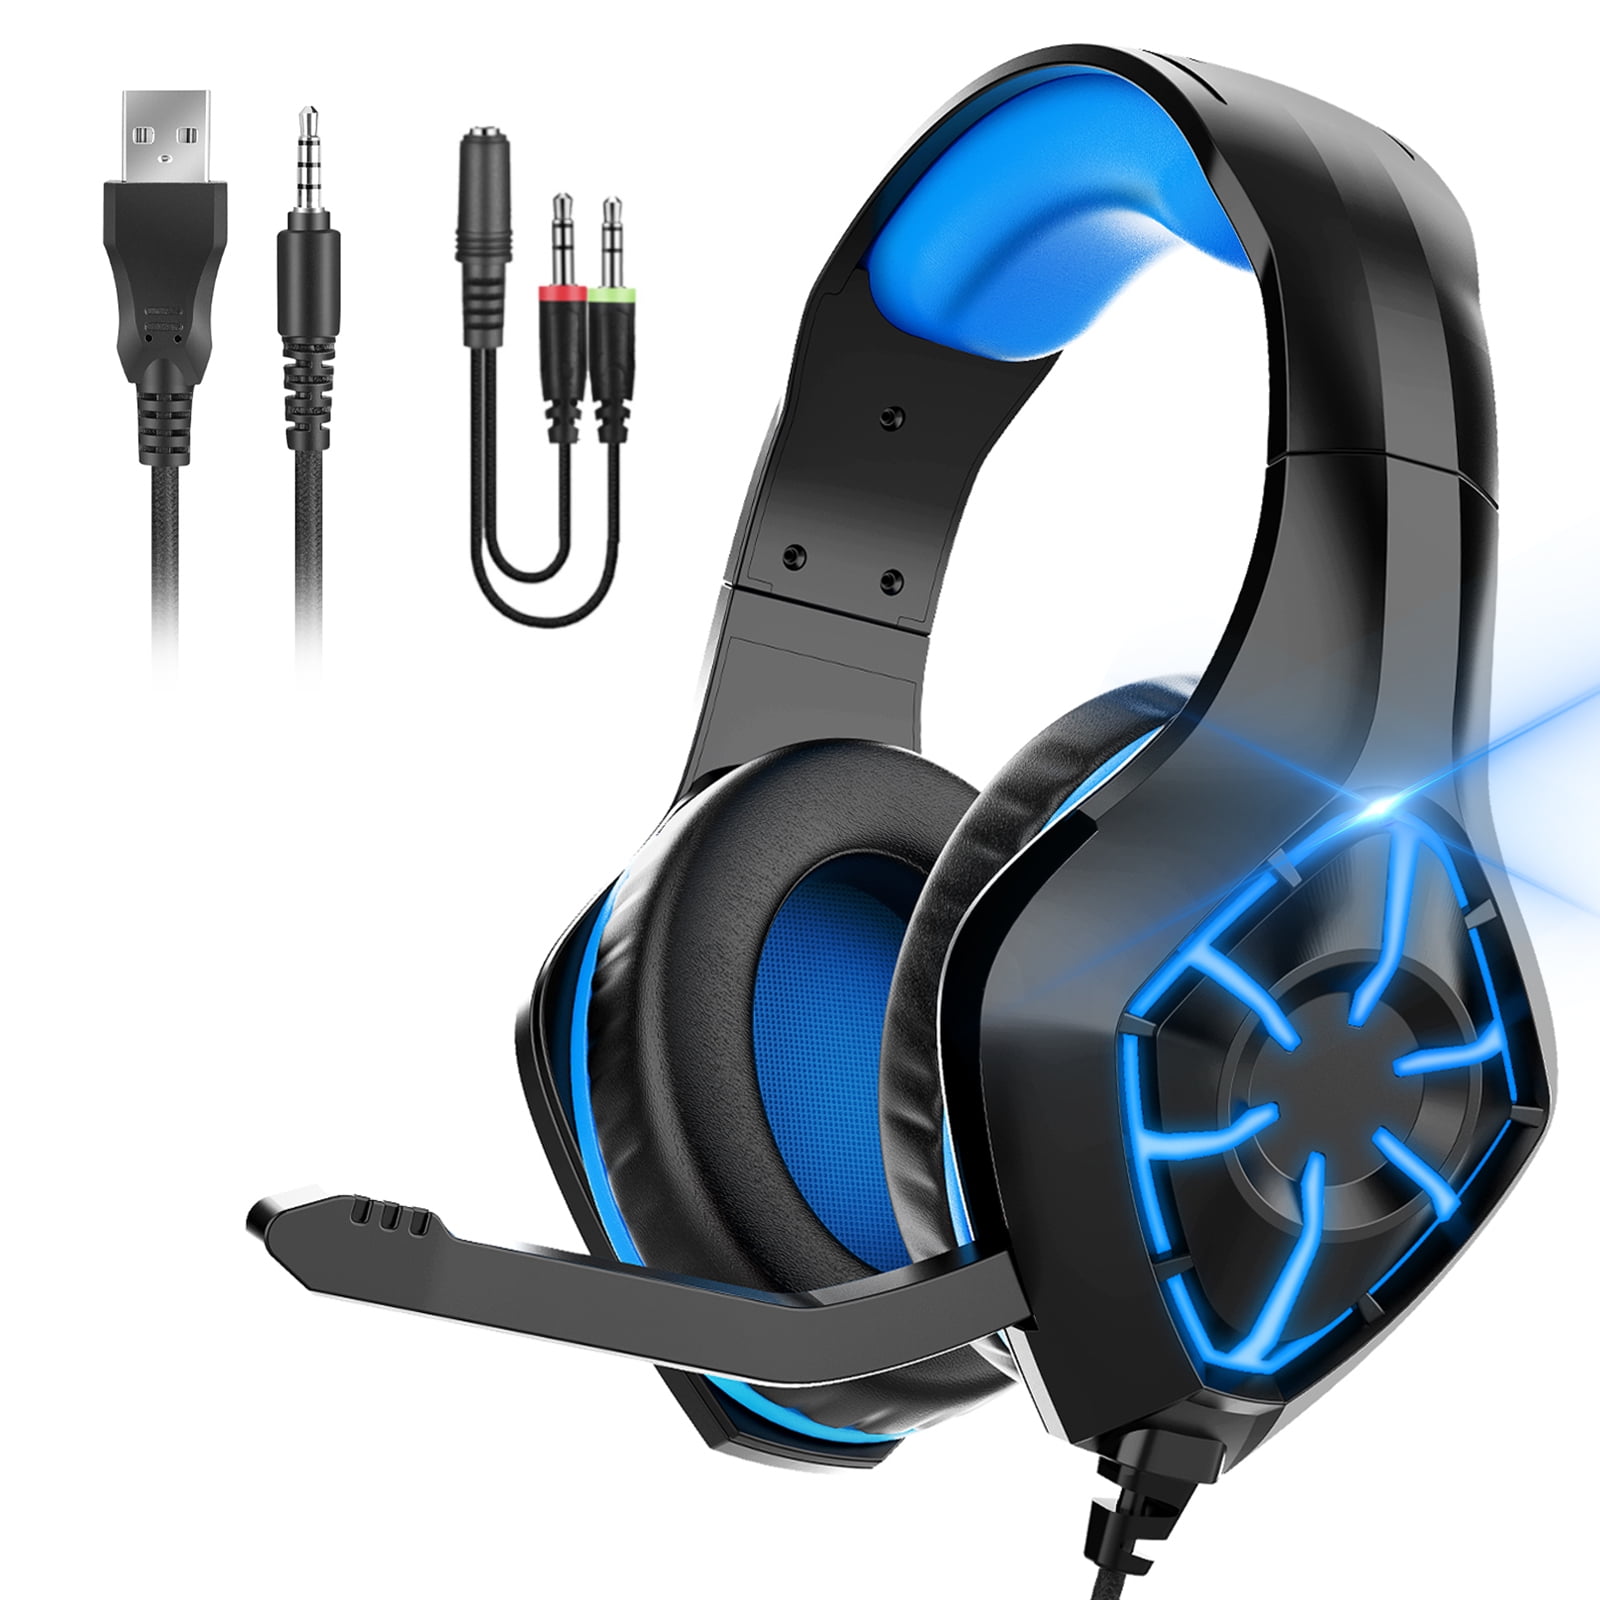  Gaming Headset for PS5 PS4 PC, Gaming Headphones with Noise  Cancelling Mic, Wired Gamer Headsets for Computer Laptop Mac Nintendo NES  Games : Video Games